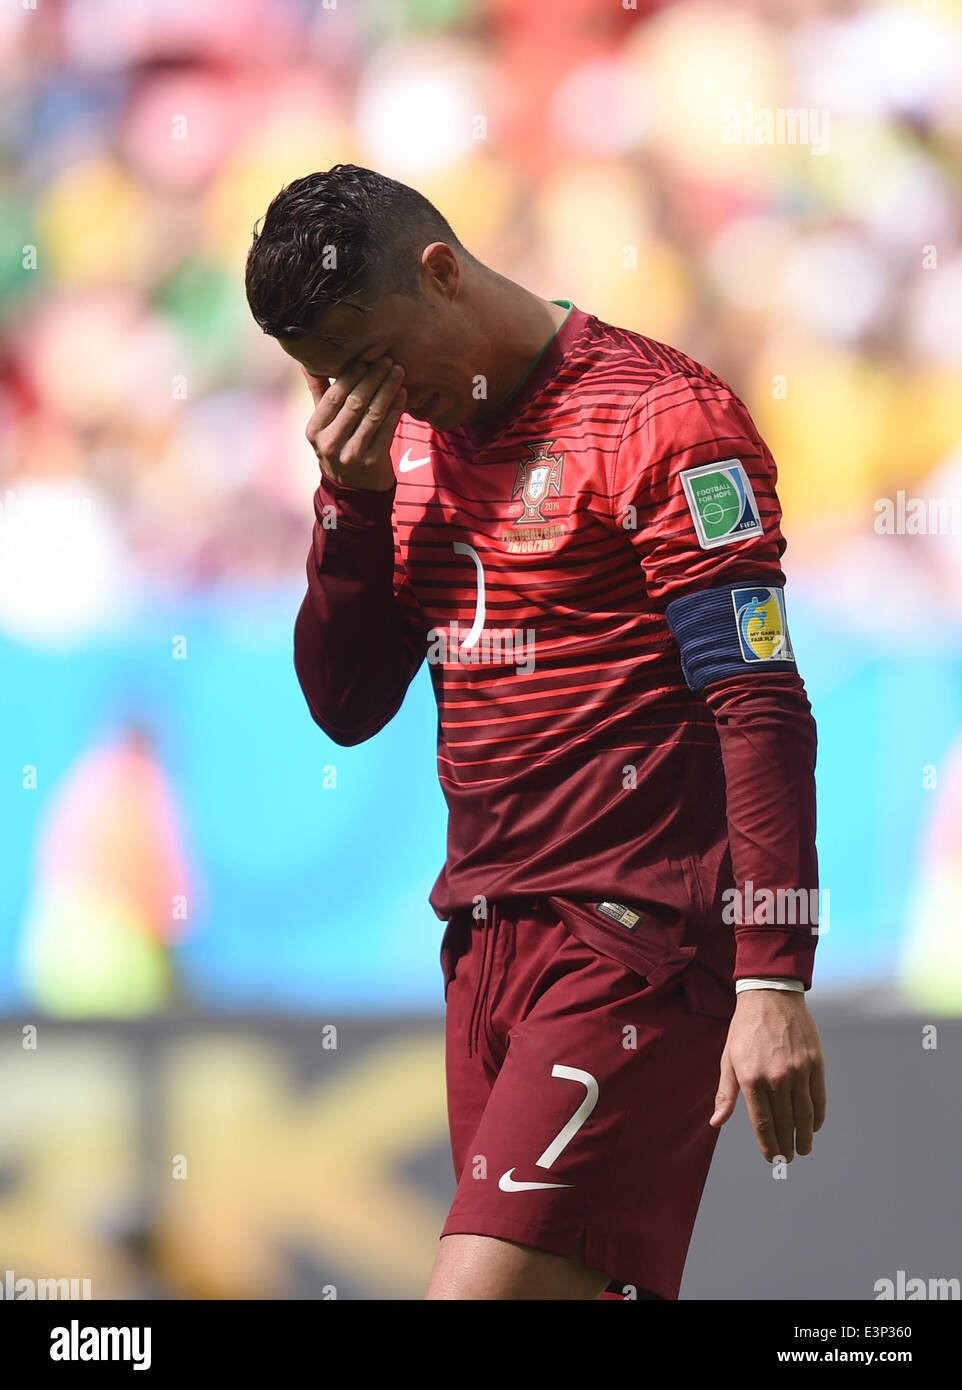 Brasilia, Brazil. 26th June, 2014. Cristiano Ronaldo of Portugal reacts during the FIFA World Cup 2014 group G preliminary round match between Portugal and Ghana at the Estadio National Stadium in Brasilia, Brazil, on 26 June 2014. Photo: Marius Becker/dpa/Alamy Live News  Stock Photo